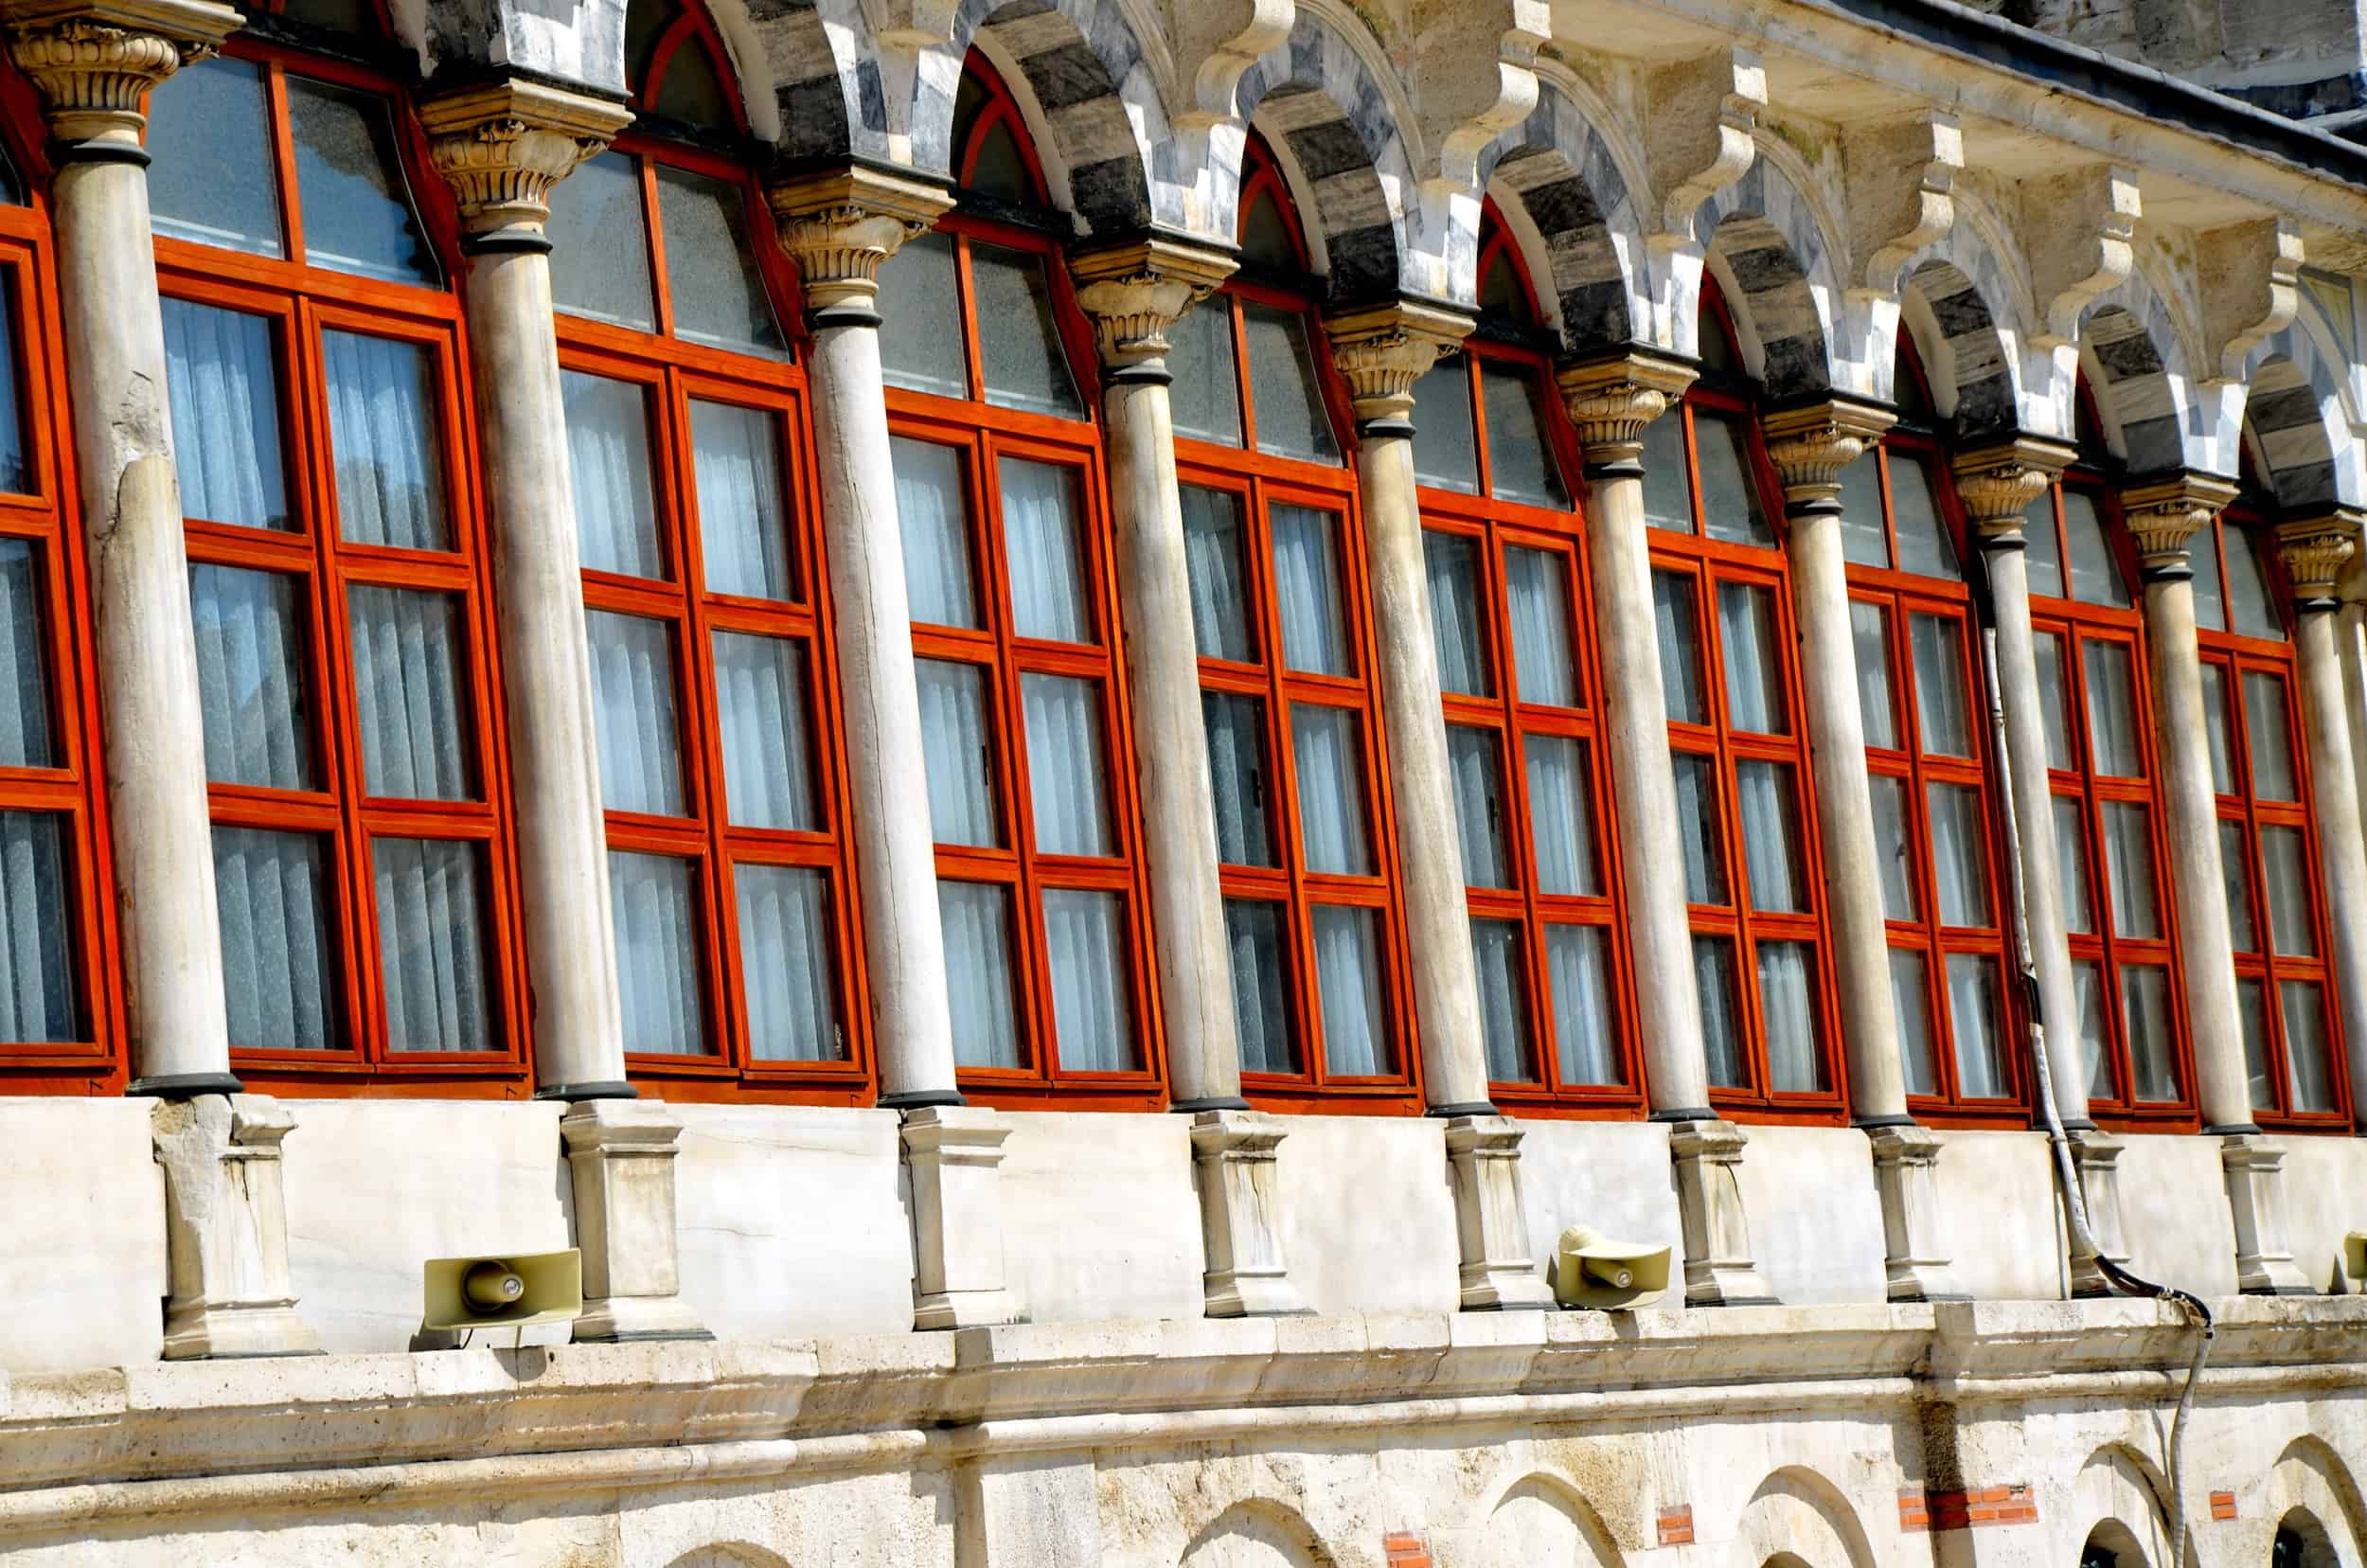 Windows and columns on the Laleli Mosque in Laleli, Istanbul, Turkey